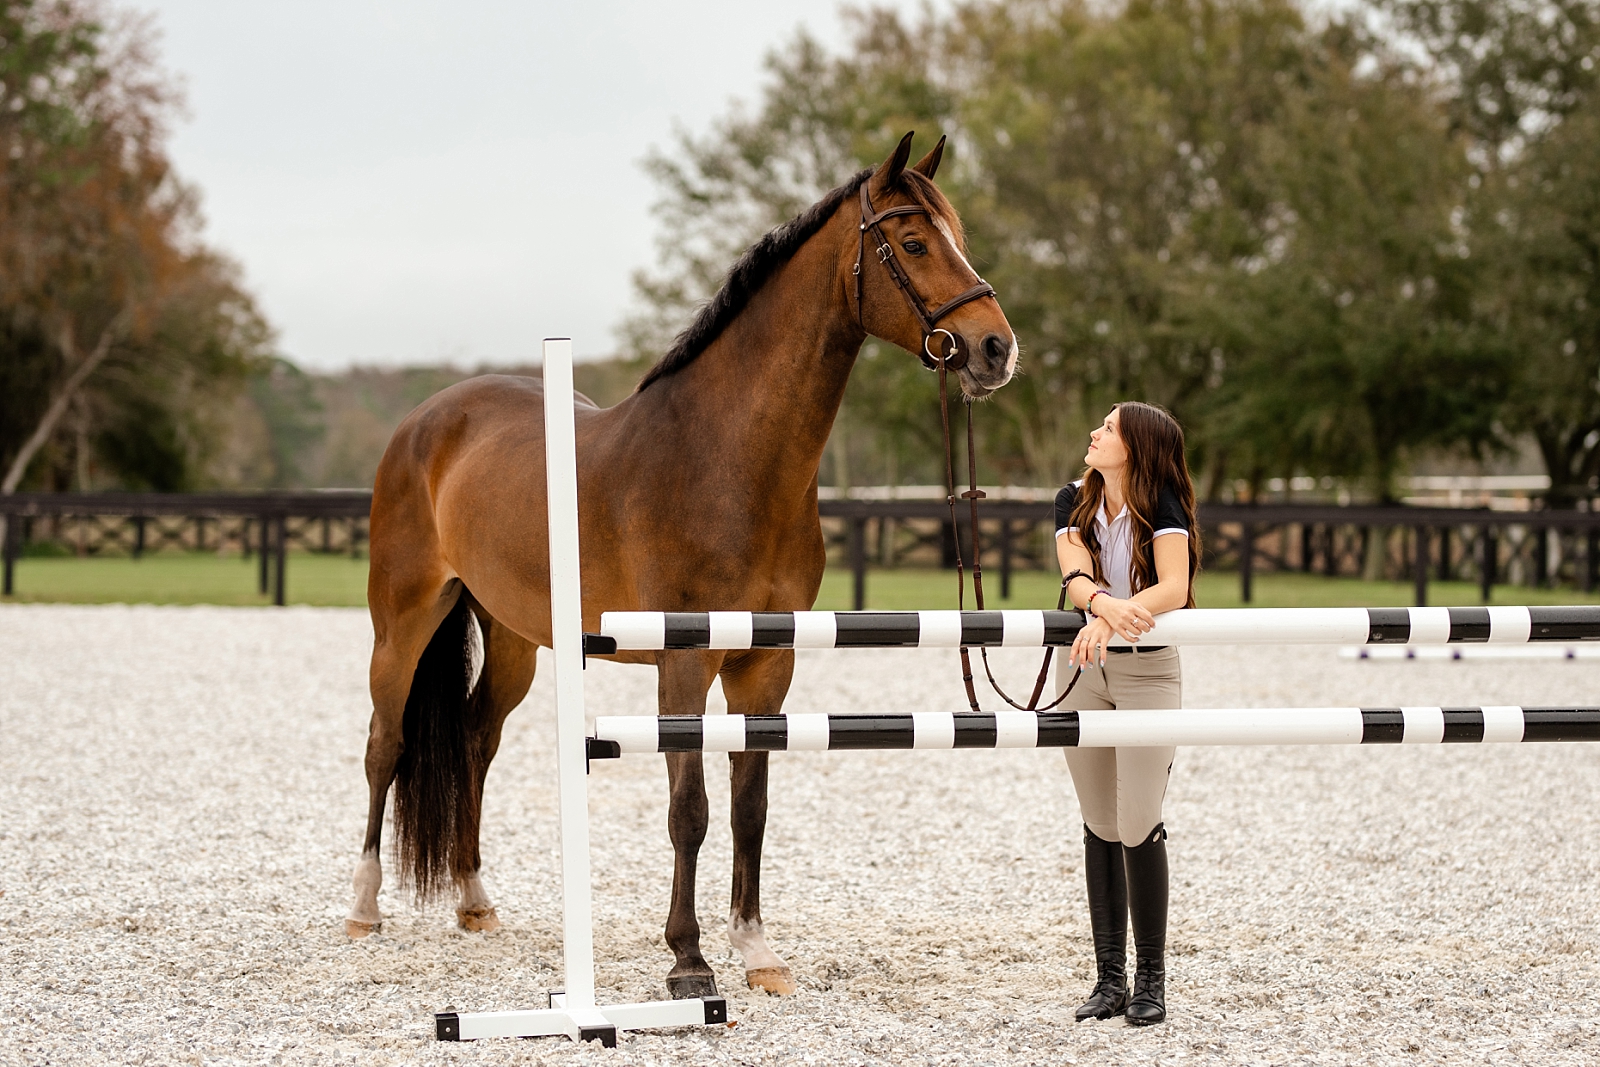 Ocala equestrian photography. Horse and rider. Jumper horse. Girl with her horse. Horse and rider posing ideas.